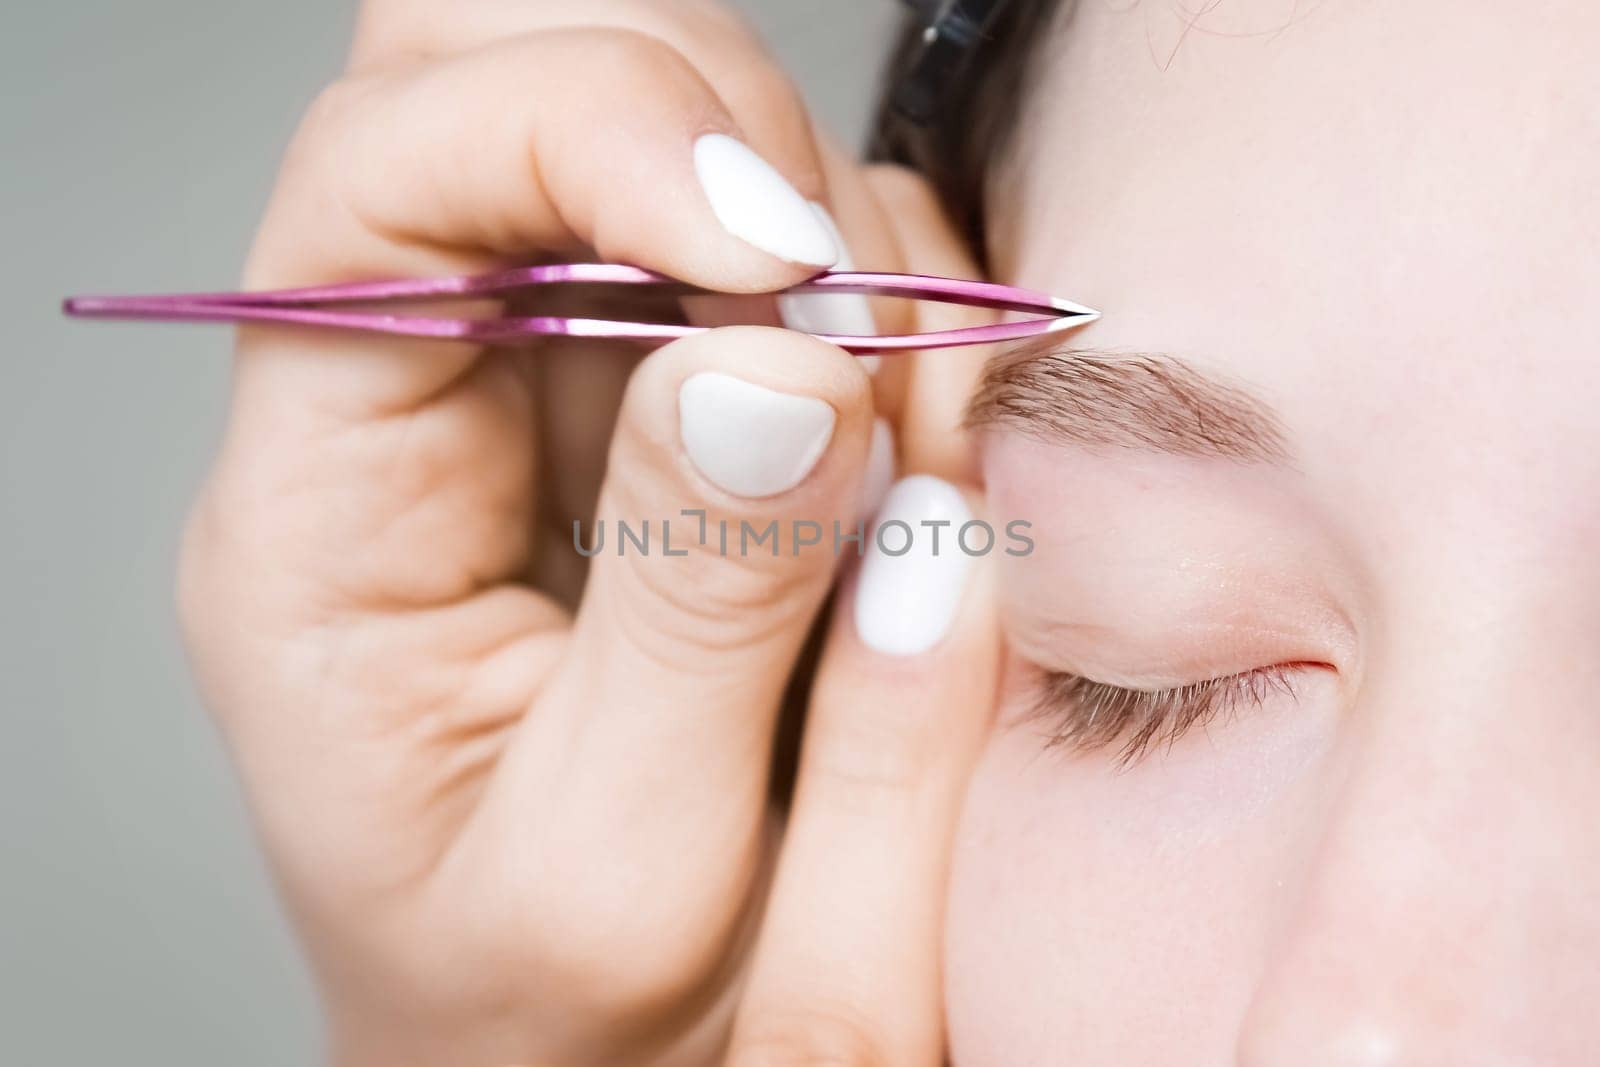 makeup artist plucks the eyebrows of a woman without makeup with tweezers. Beautiful eyebrows close-up. Professional makeup and cosmetological skin care by yanik88